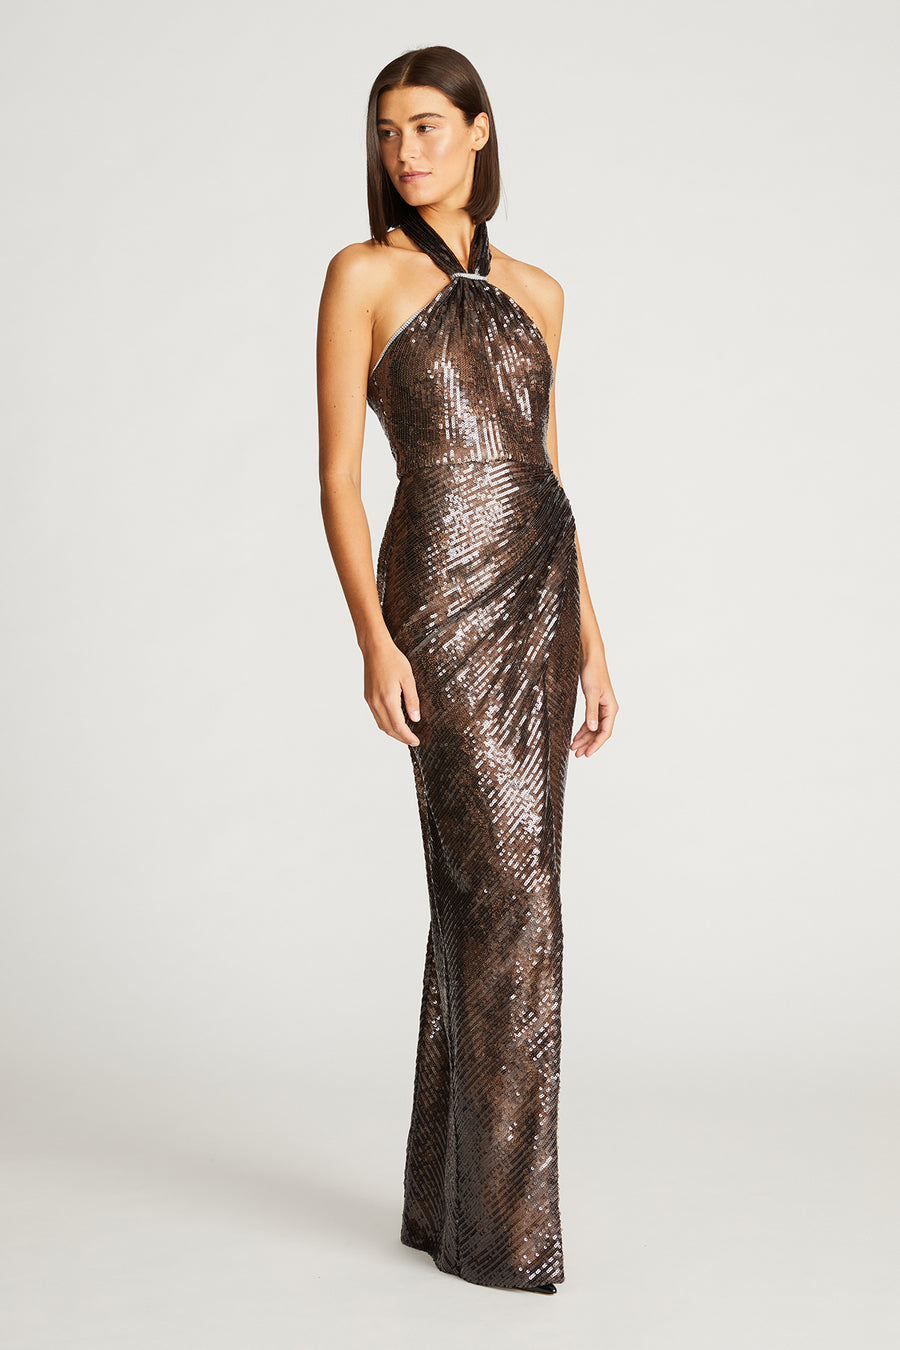 Umbra Gown In Lace Sequin